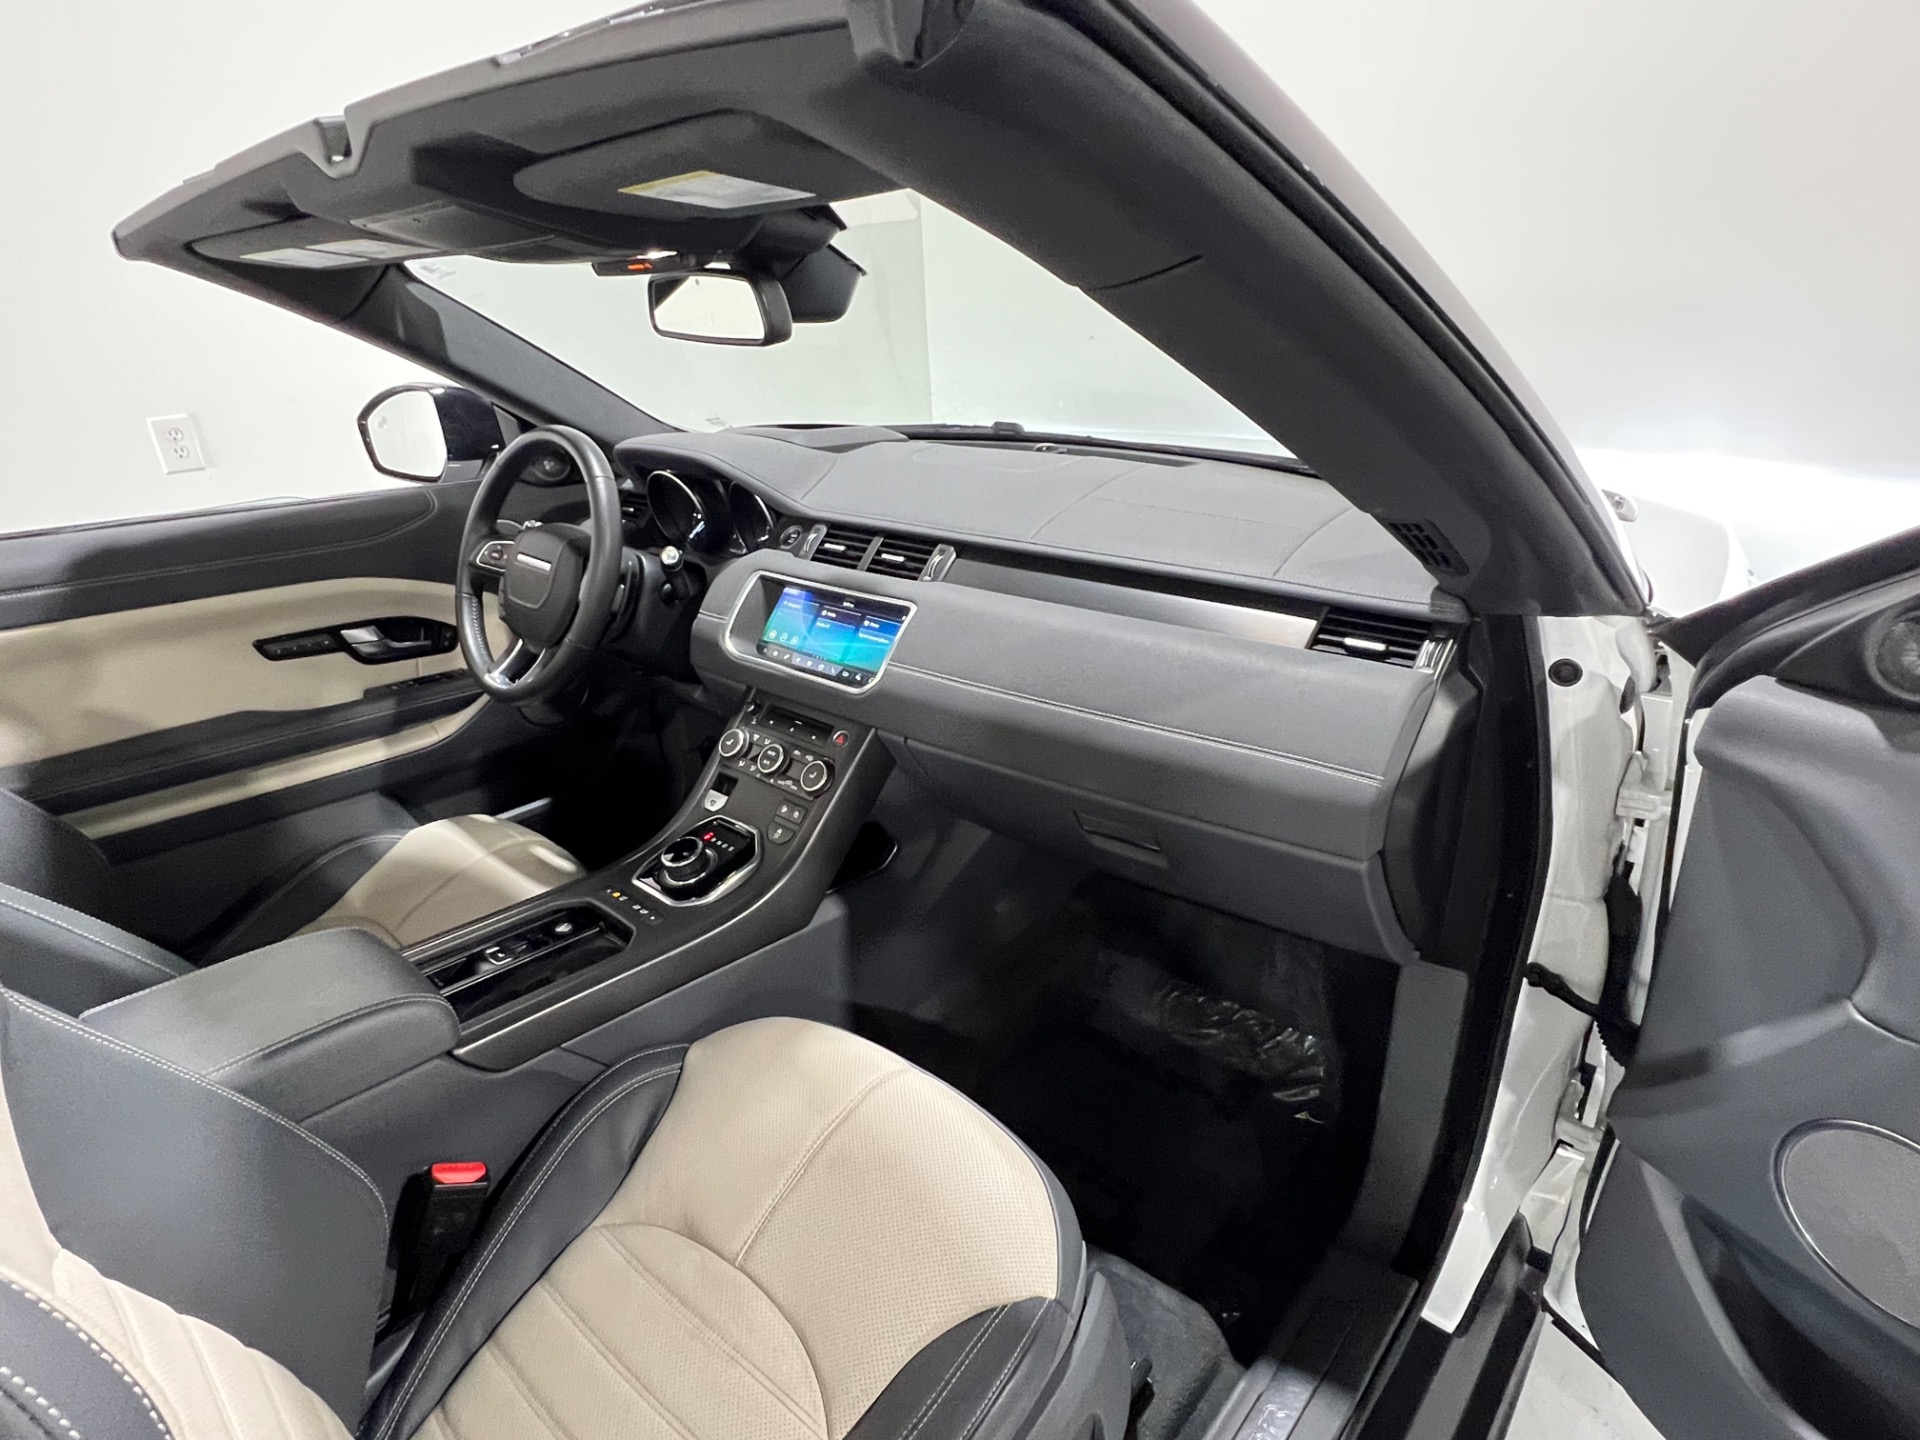 For DYNAMIC Prime Dynamic Used White HSE 2019 Land Sale Rover 2DR HSE #4387 Fuji Convertible | Motorz Range AWD Rover (Sold) Evoque Stock